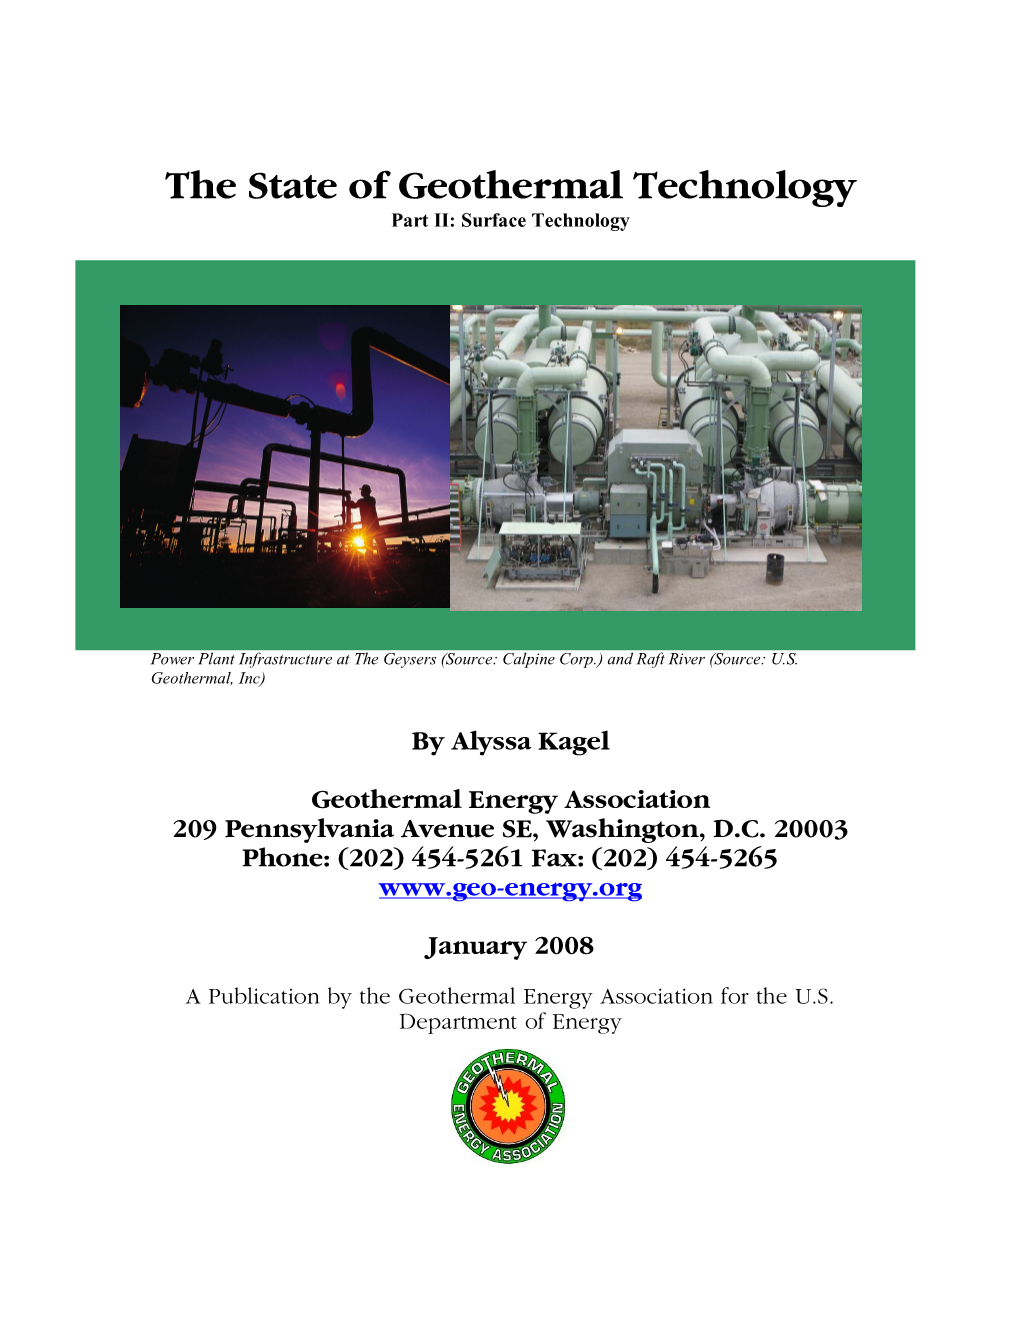 The State of Geothermal Technology Part II: Surface Technology